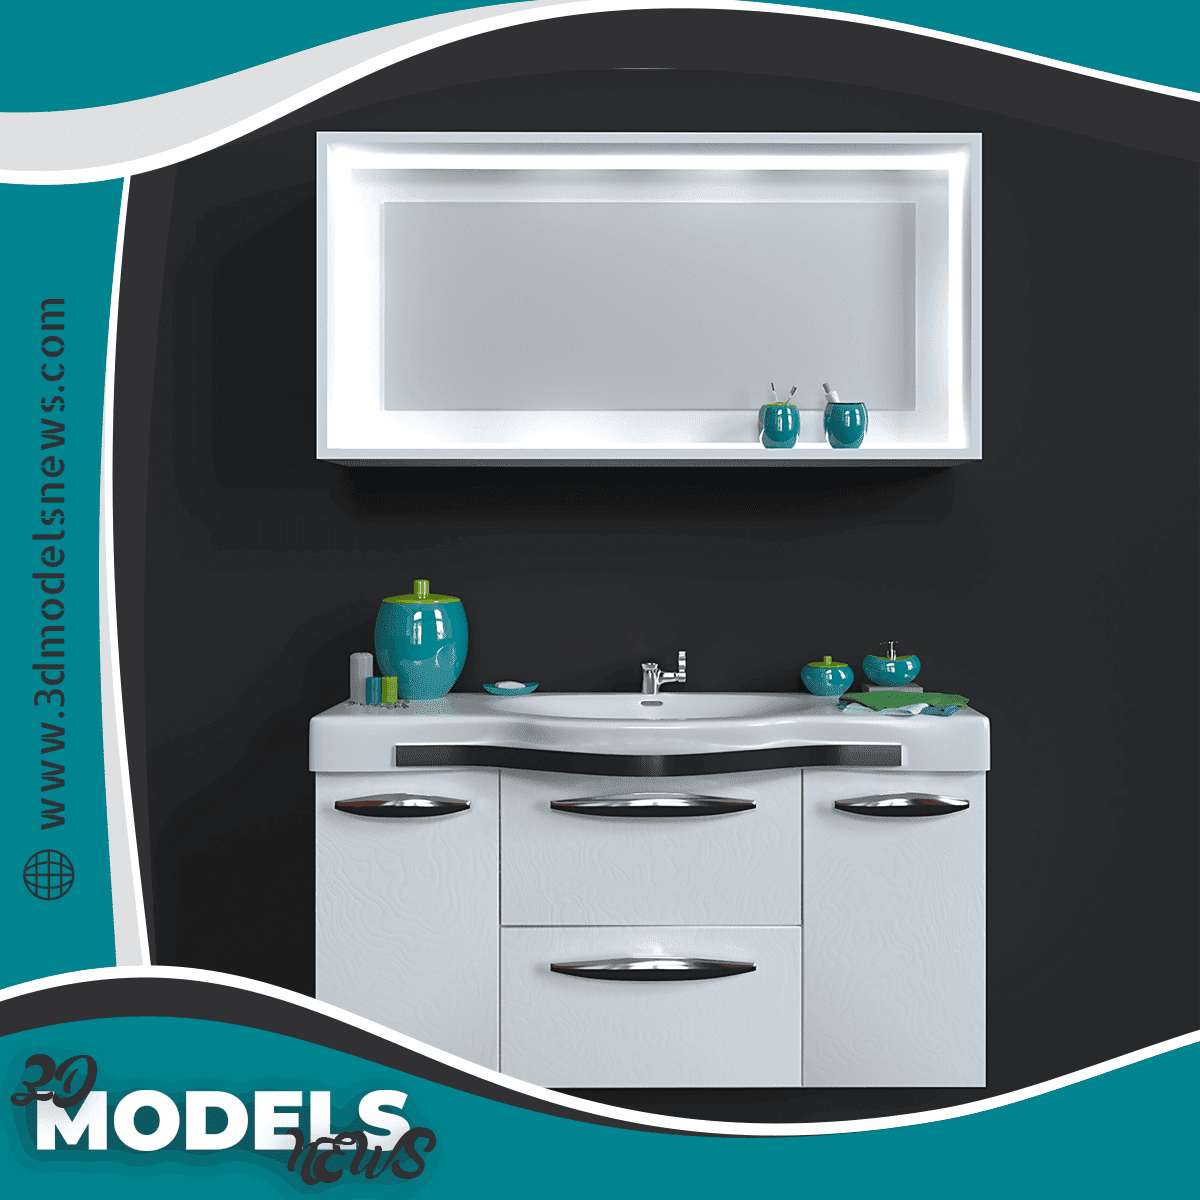 Wash basin model with mirror and decor set